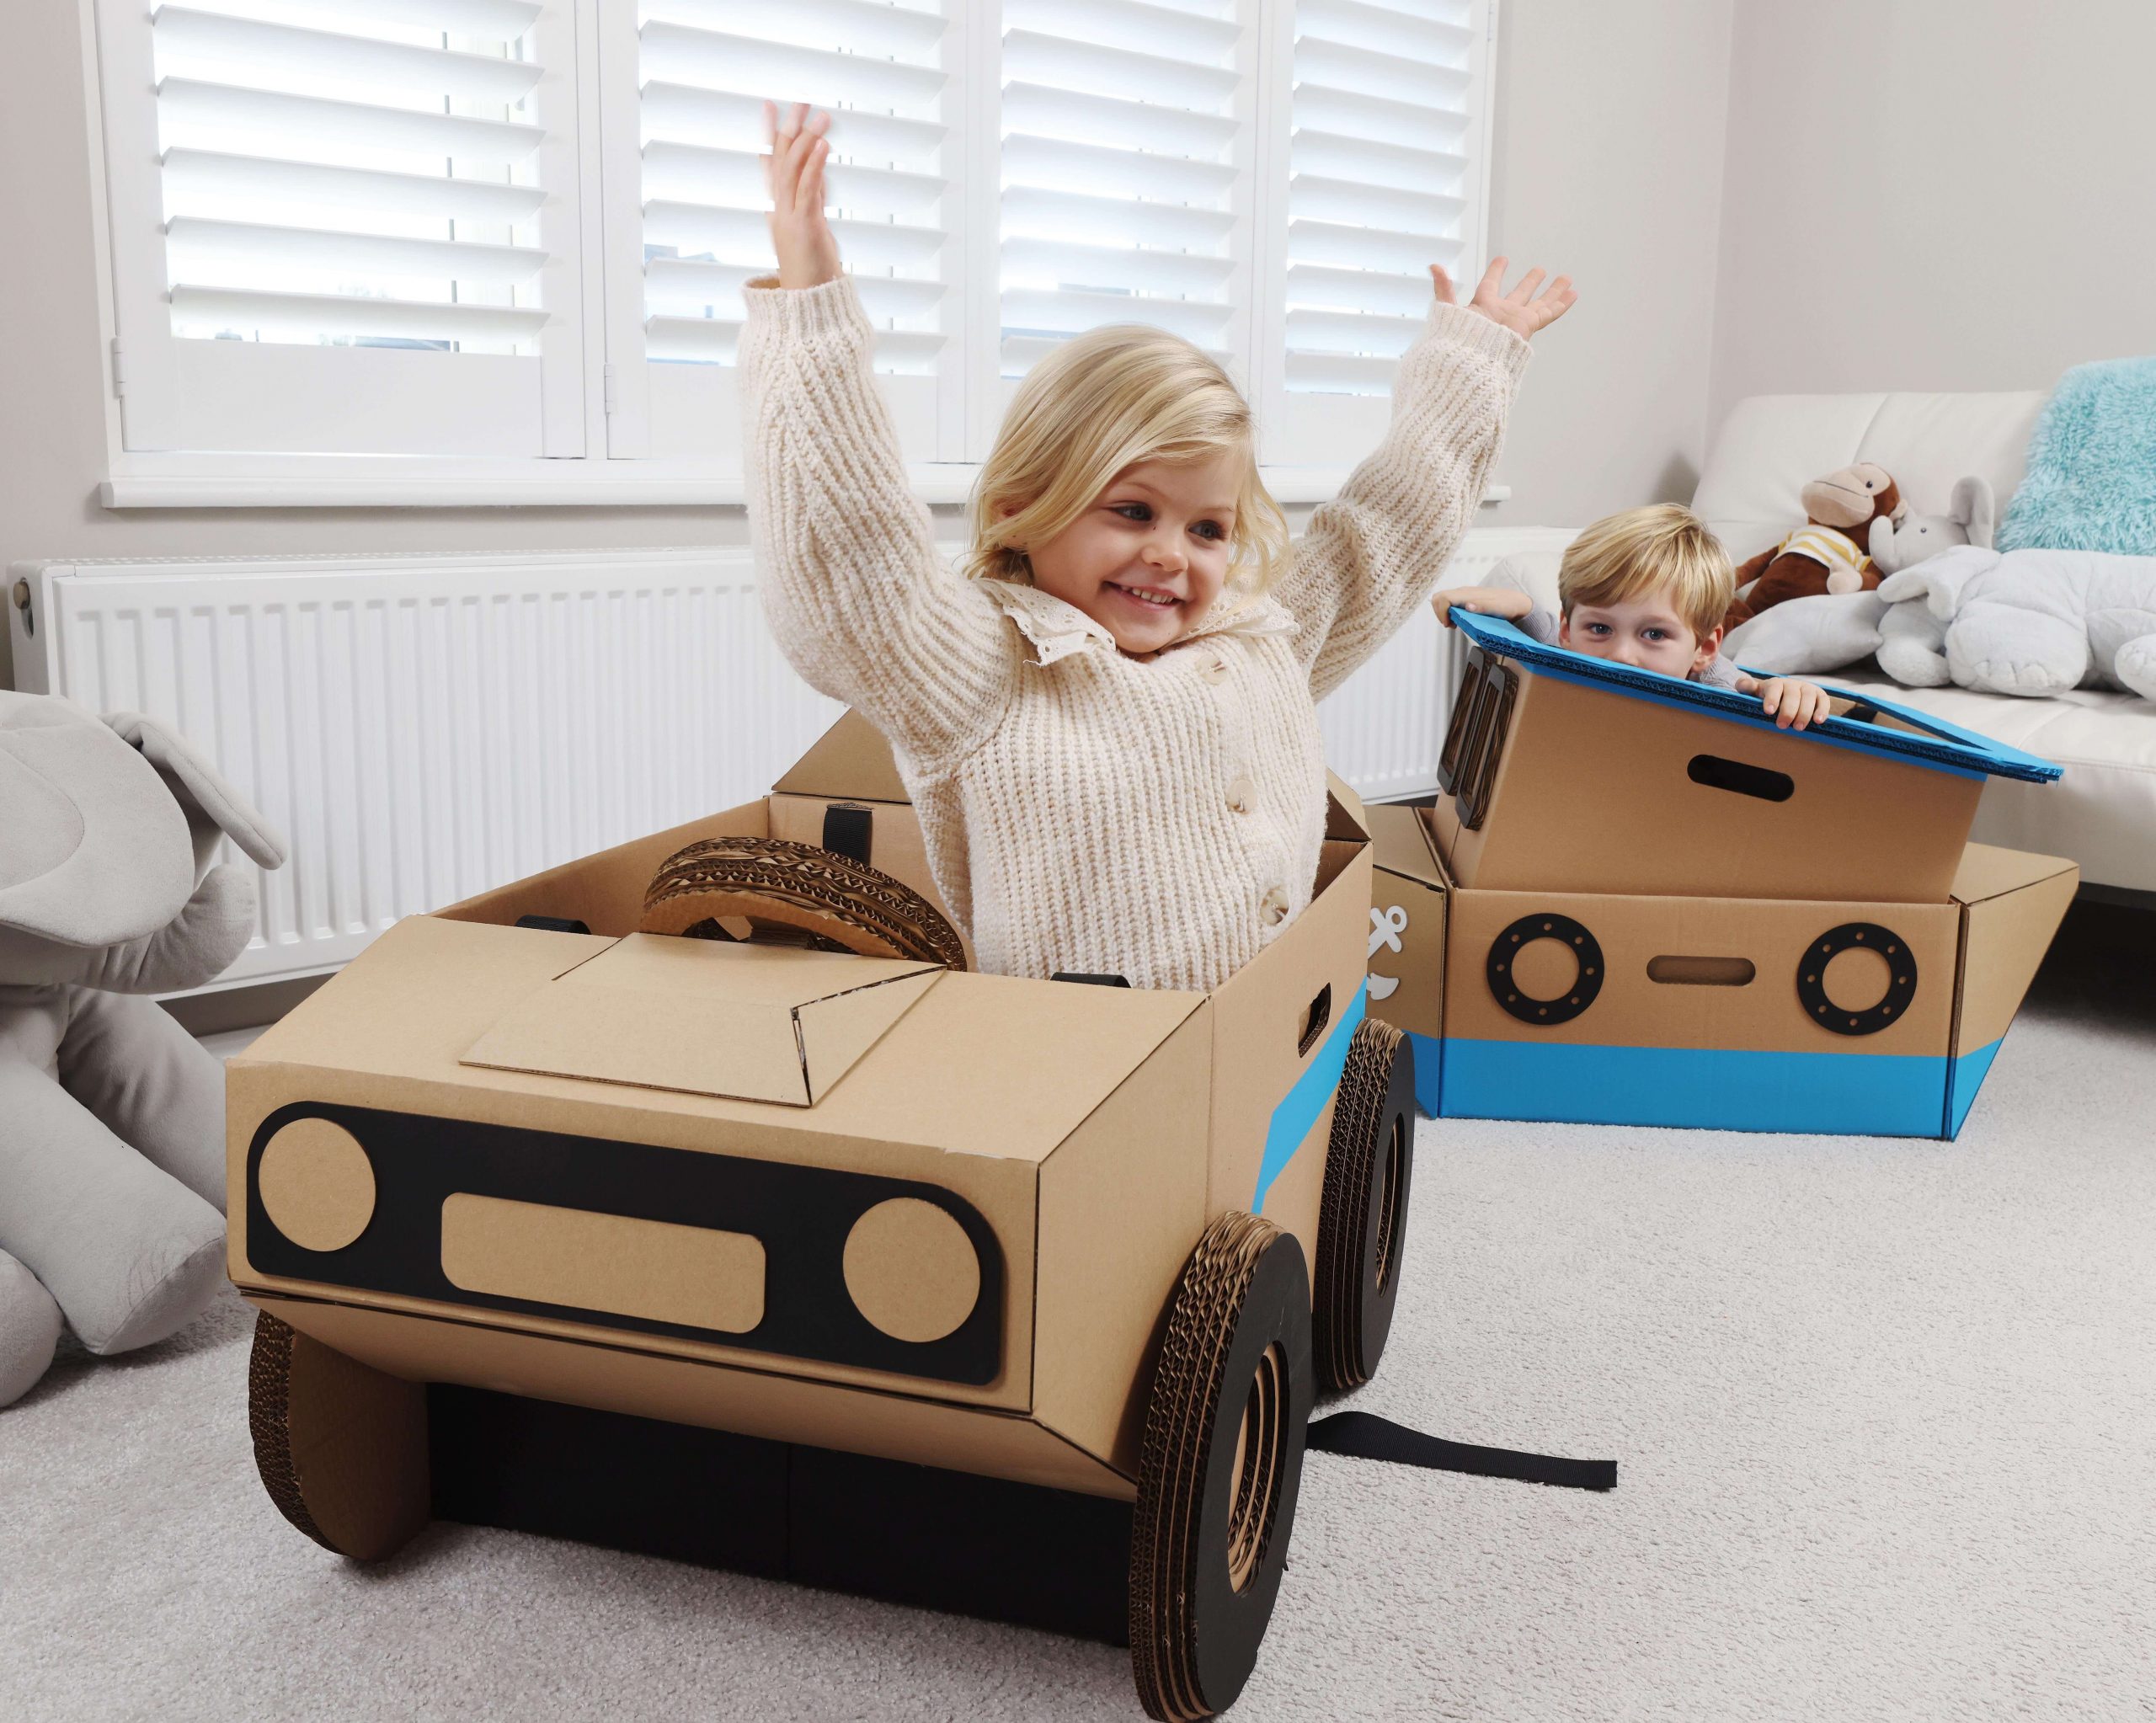 children playing with the anyvan box toys